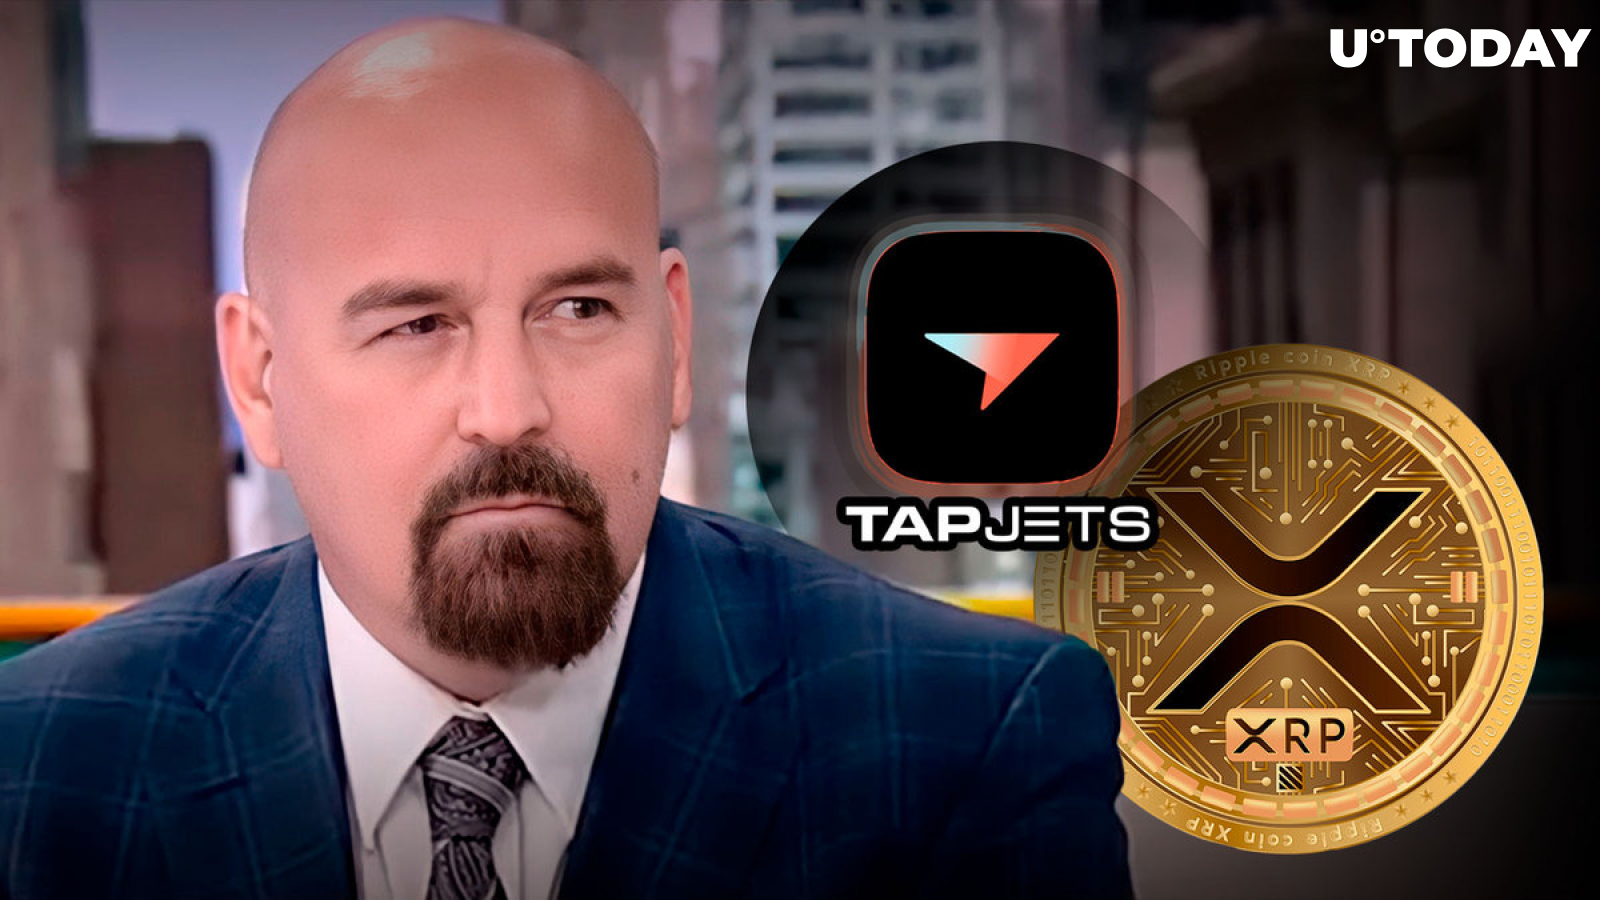 XRP Perfect Payment Option for TapJets, Ripple Advocate Deaton Explains Why